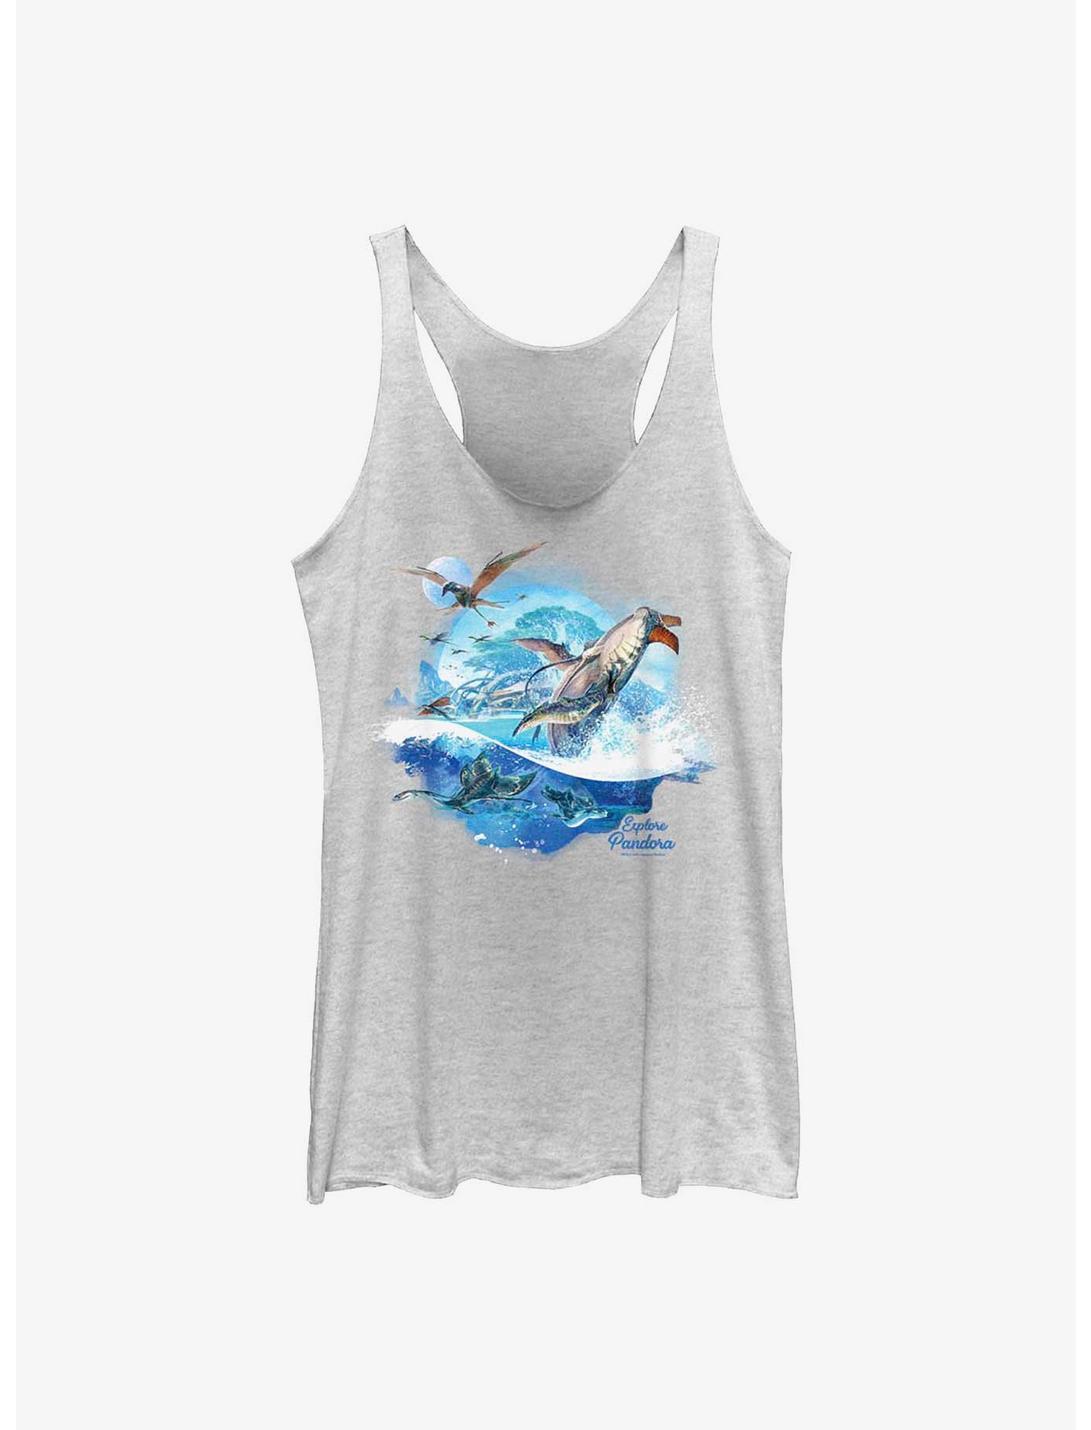 Avatar: The Way Of The Water Explore Pandora Womens Tank Top, WHITE HTR, hi-res